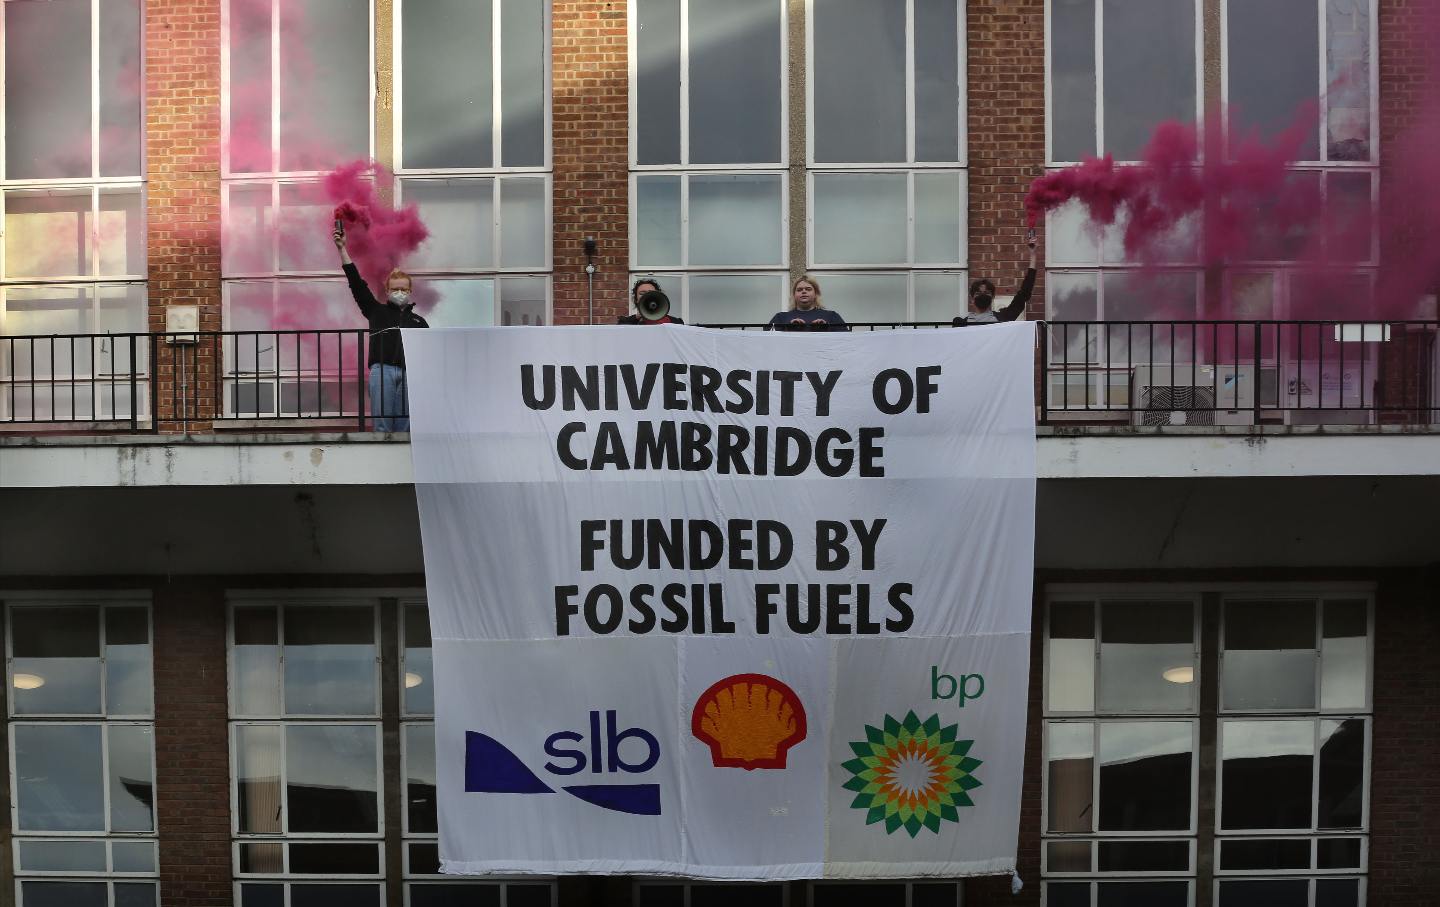 Fossil fuel donations university protest